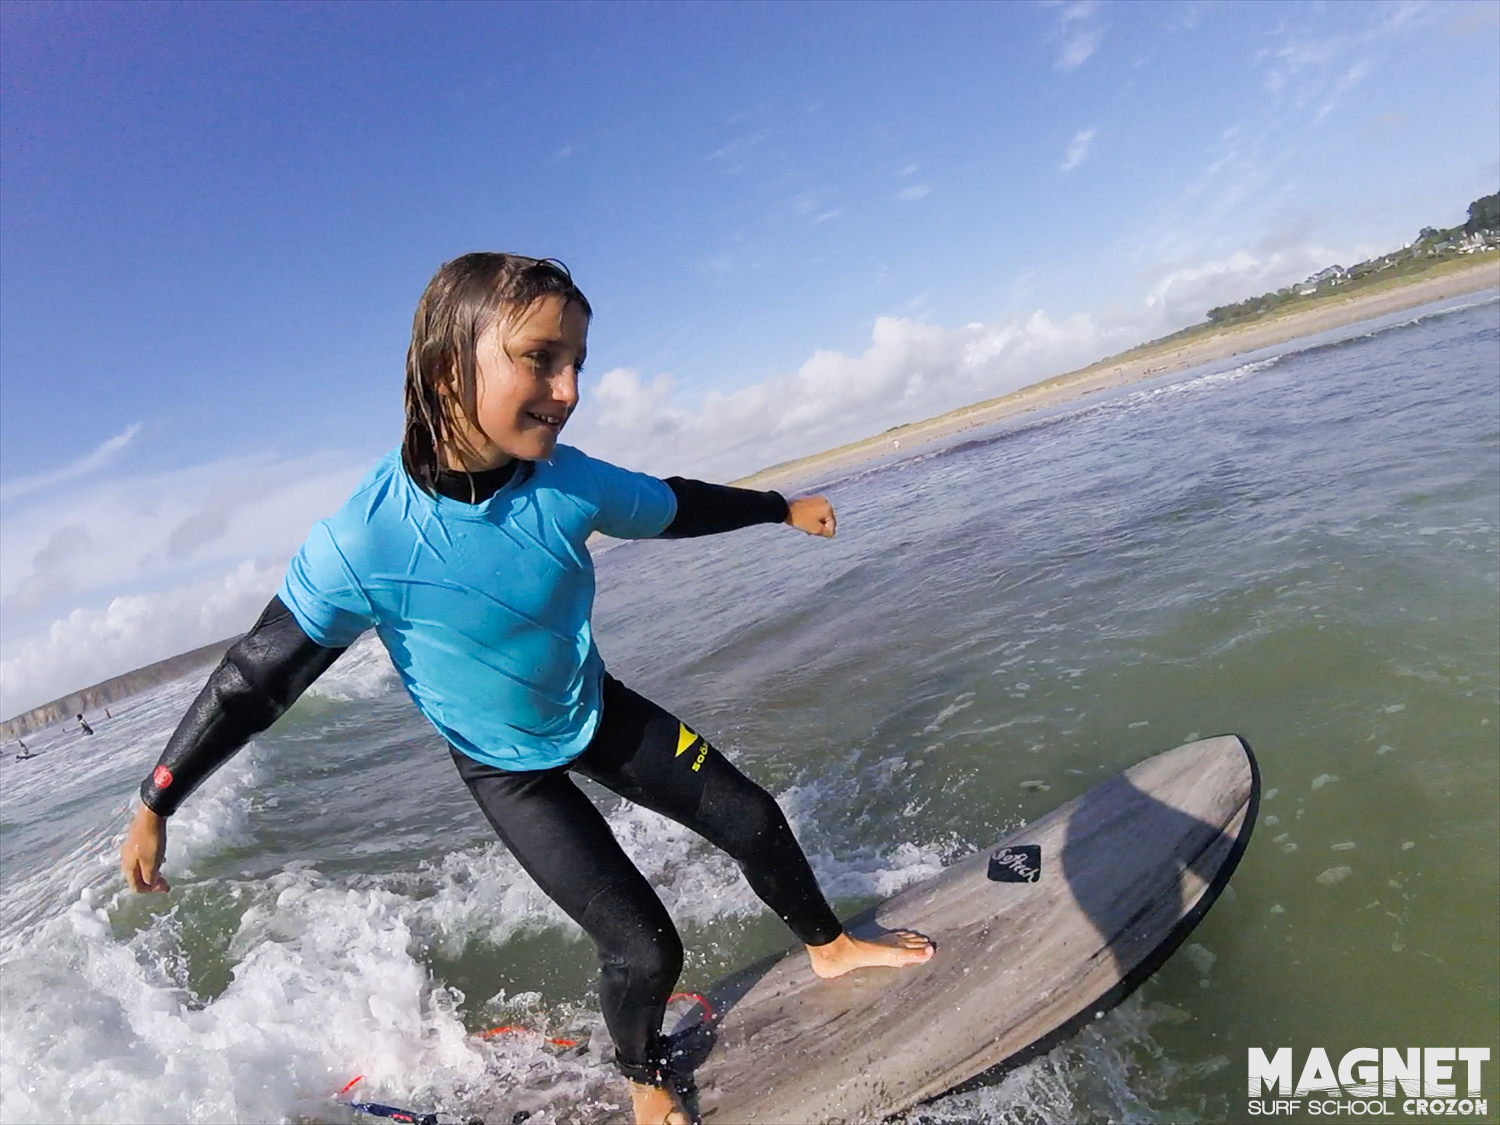 Have fun with the Crozon Morgat surf school.